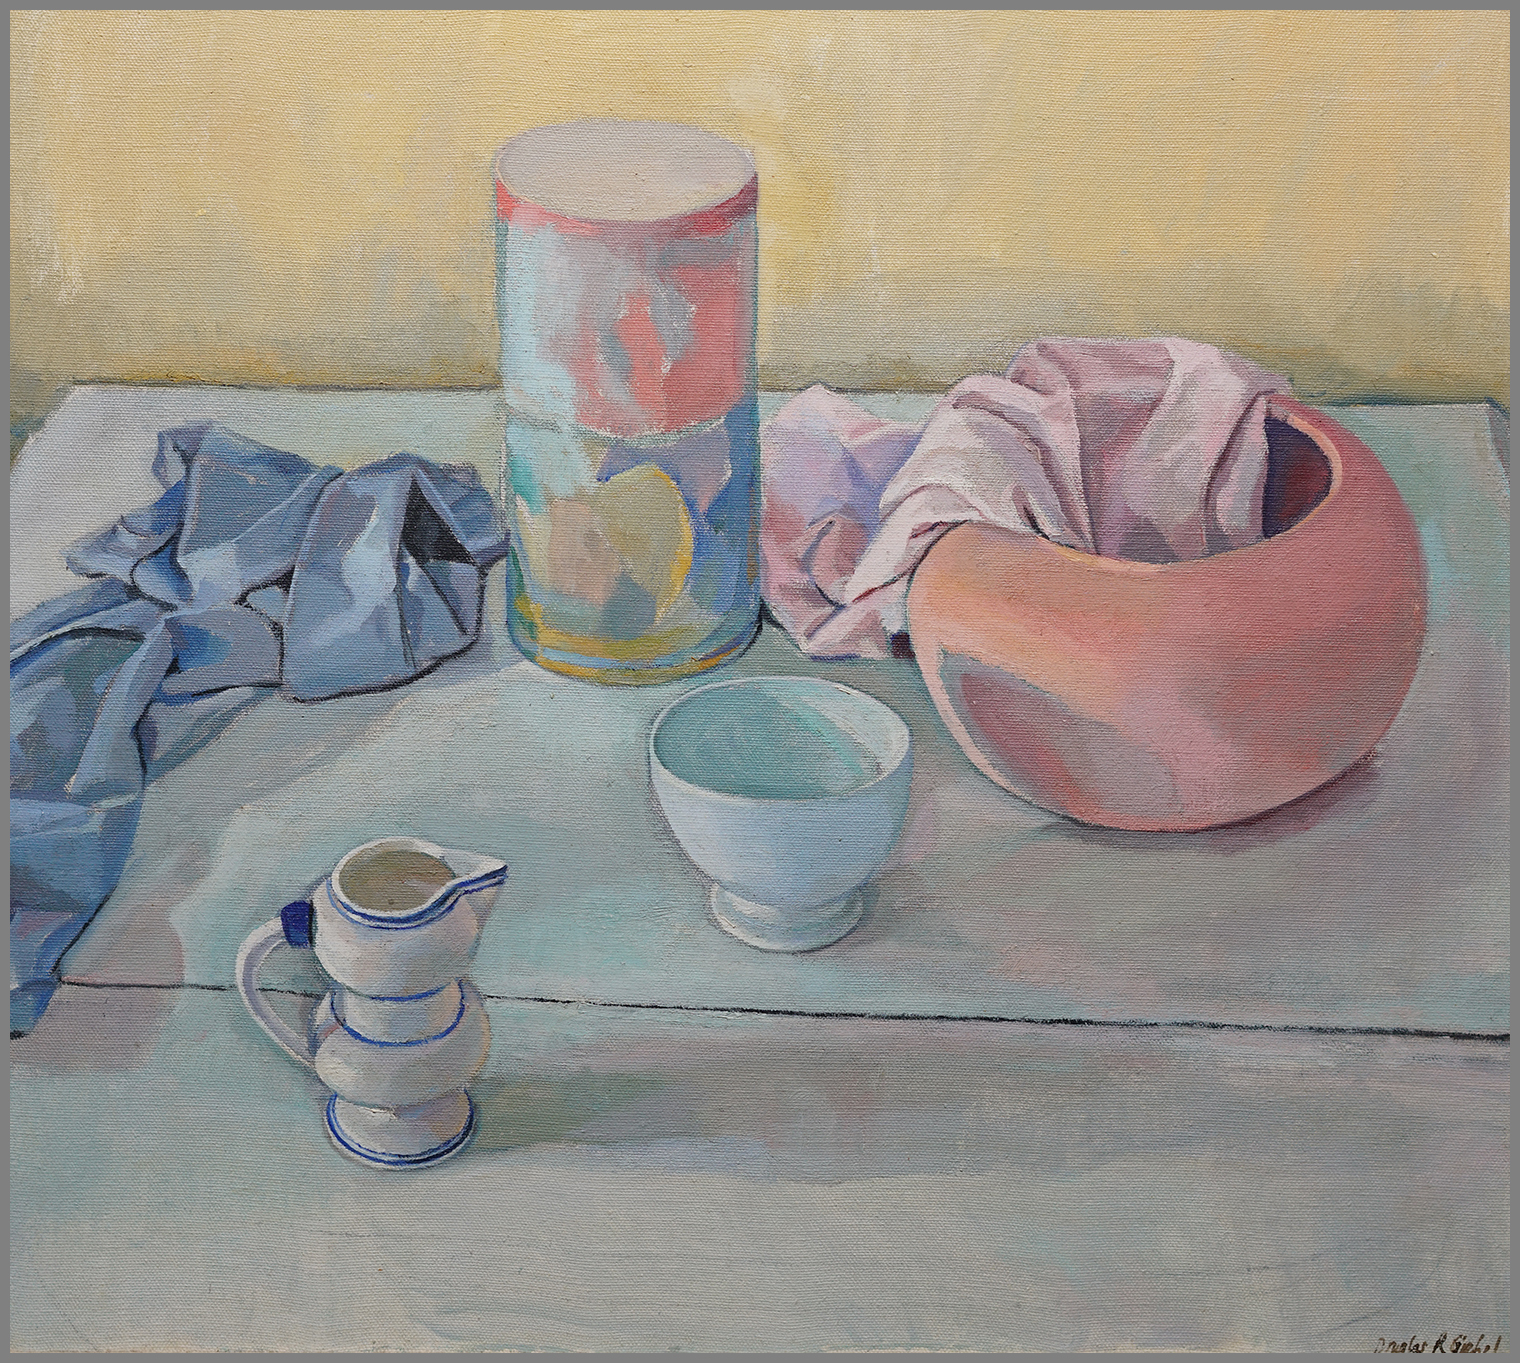  Still Life with White Pitcher, oil/canvas, 18 x 20 inches 